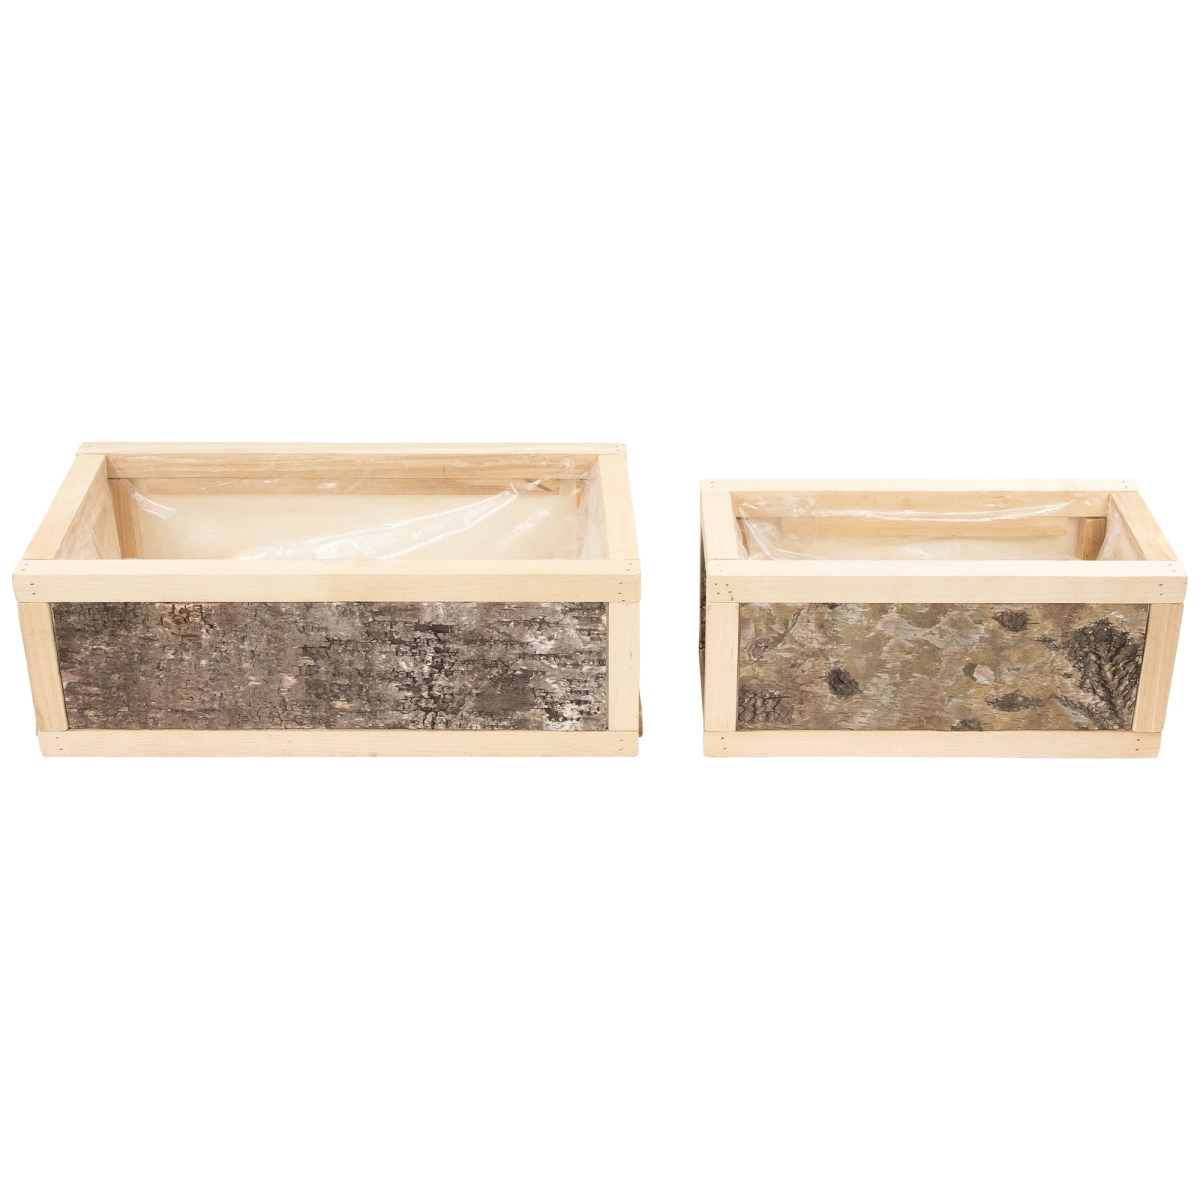 Picture of Northlight 35737286 15.5 in. Rustic Wooden Storage Boxes - Set of 2